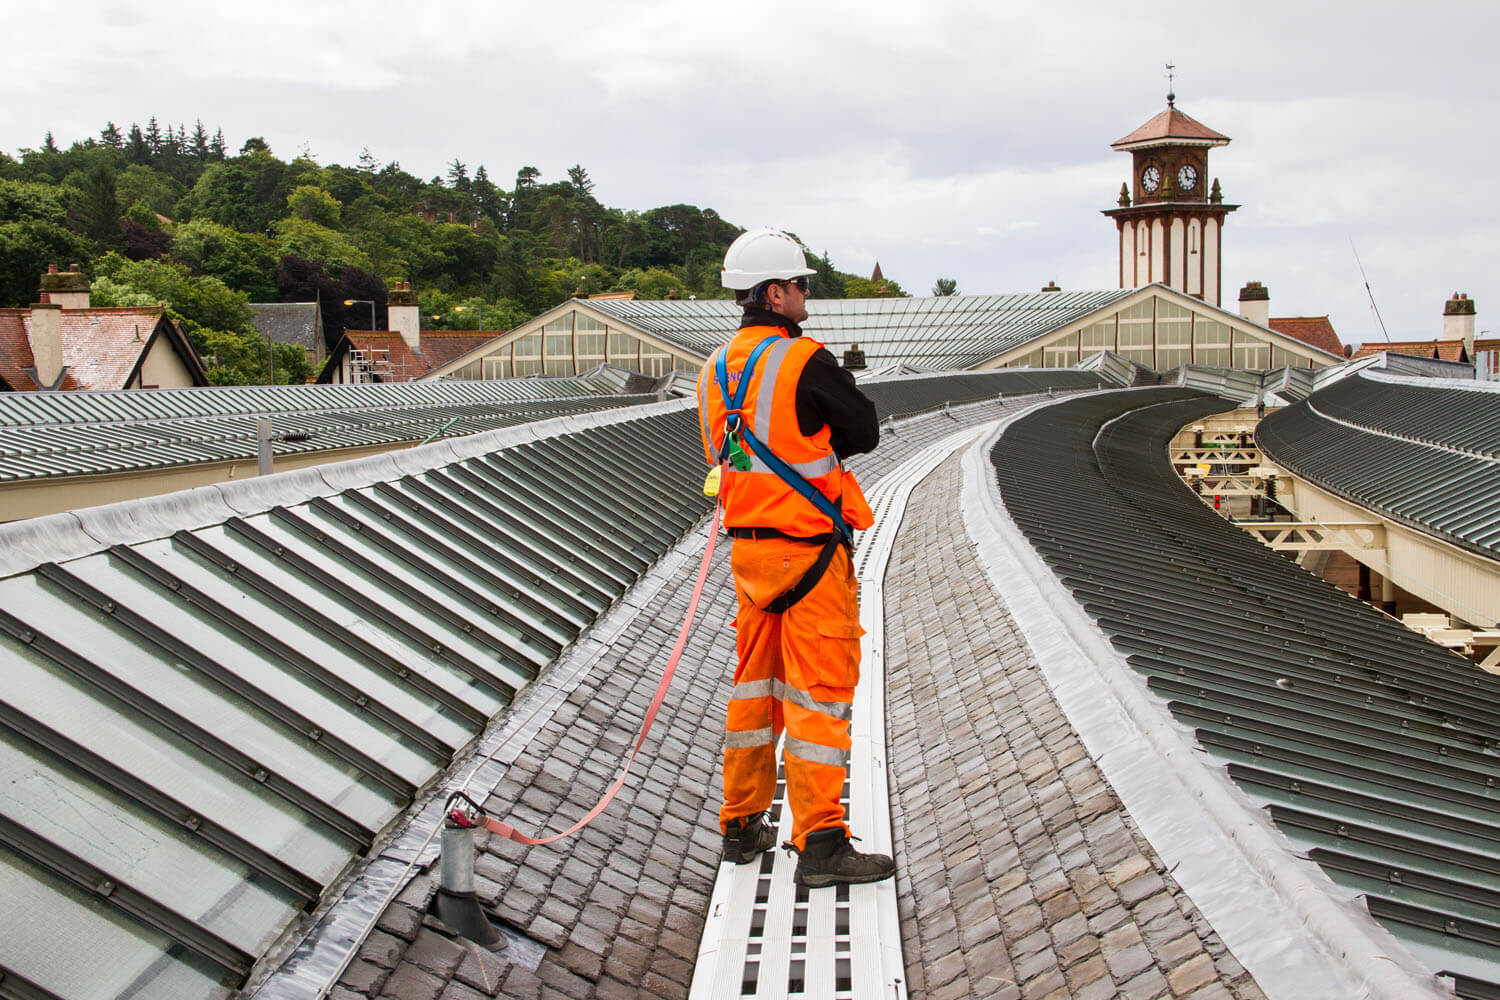 Wemyss Bay Station Roof Access and Spencer Group Employee